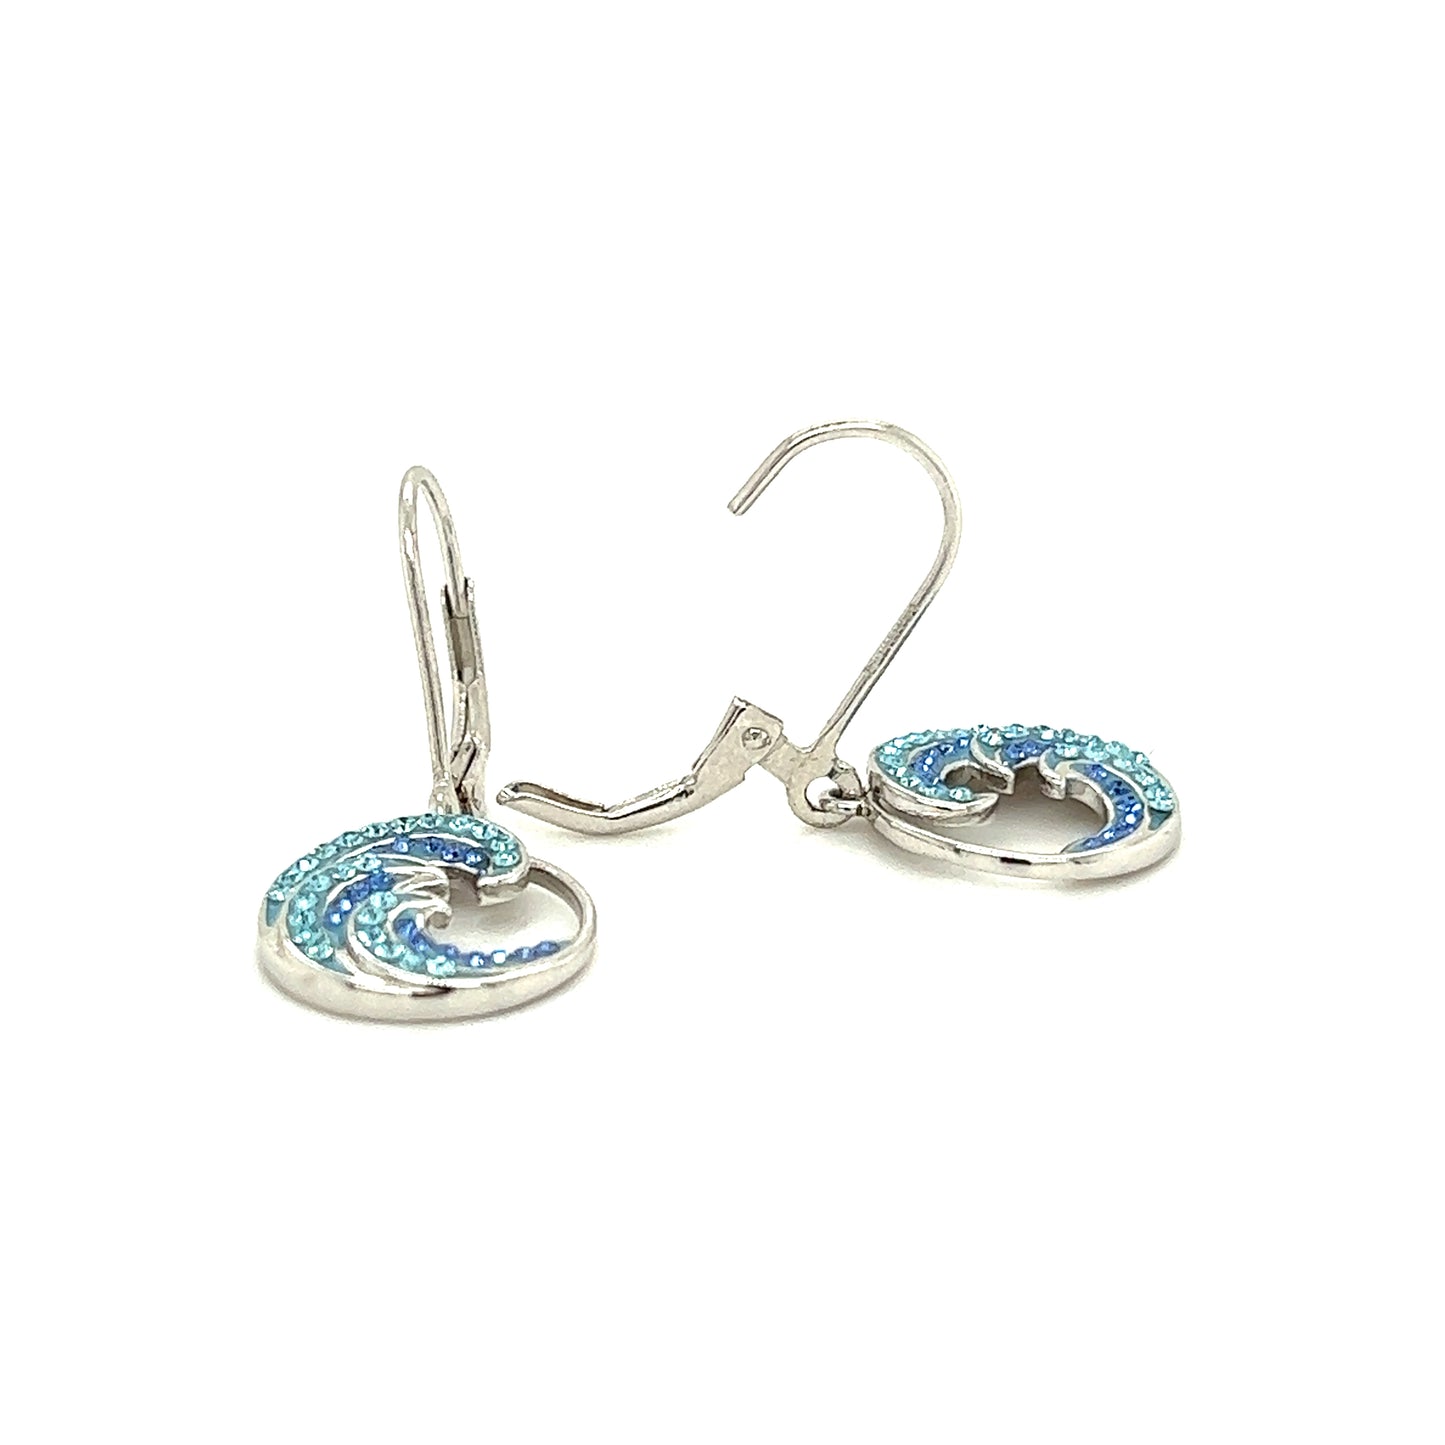 Wave Dangle Earrings with Blue and Aqua Crystals in Sterling Silver Front Flat View with Open Back